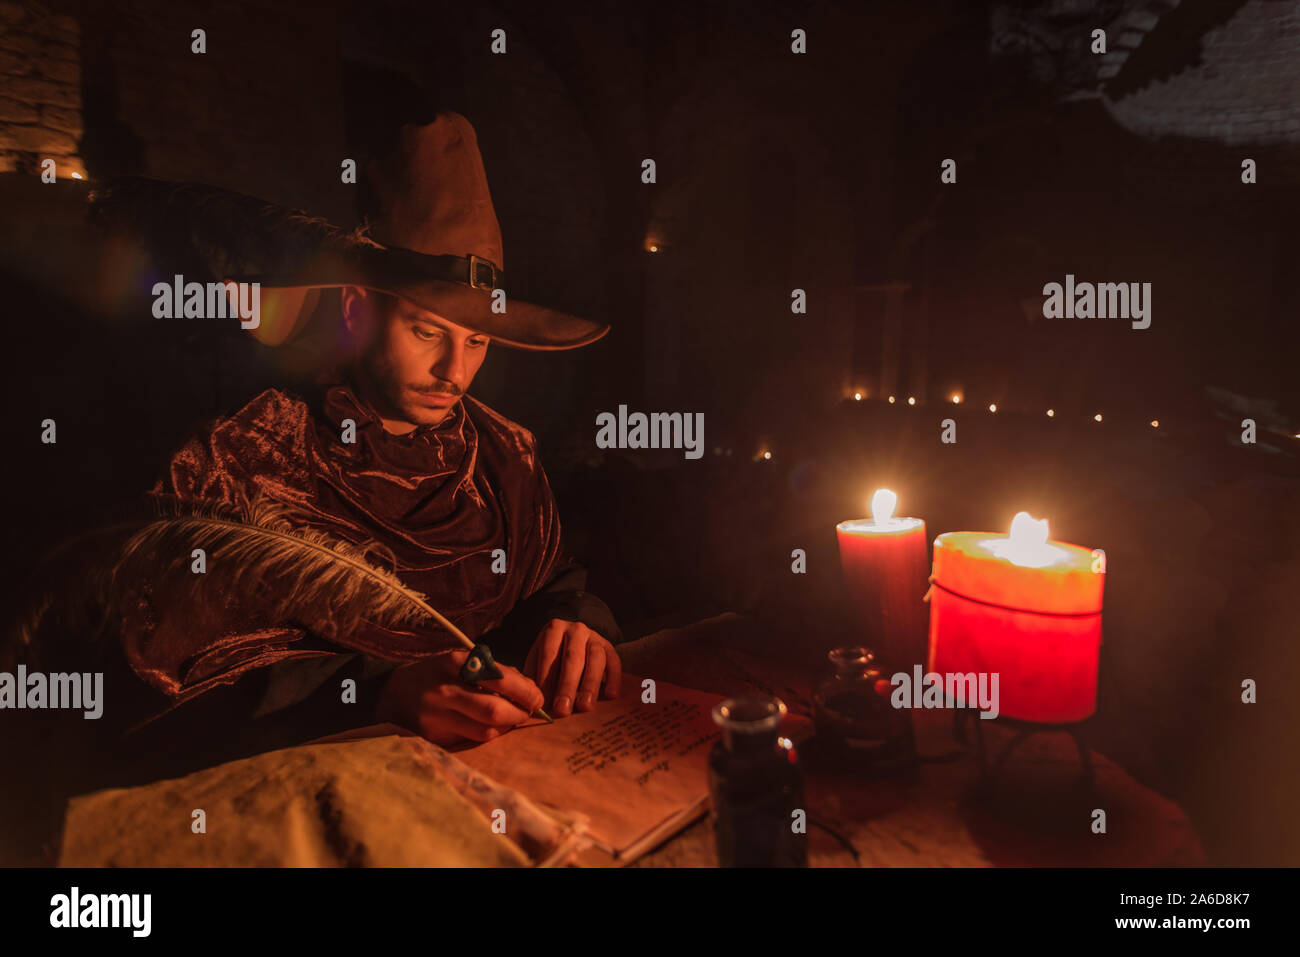 Young prophet Nostradamus writing his prophesies on a paper sitting in a ruined old church at night Stock Photo